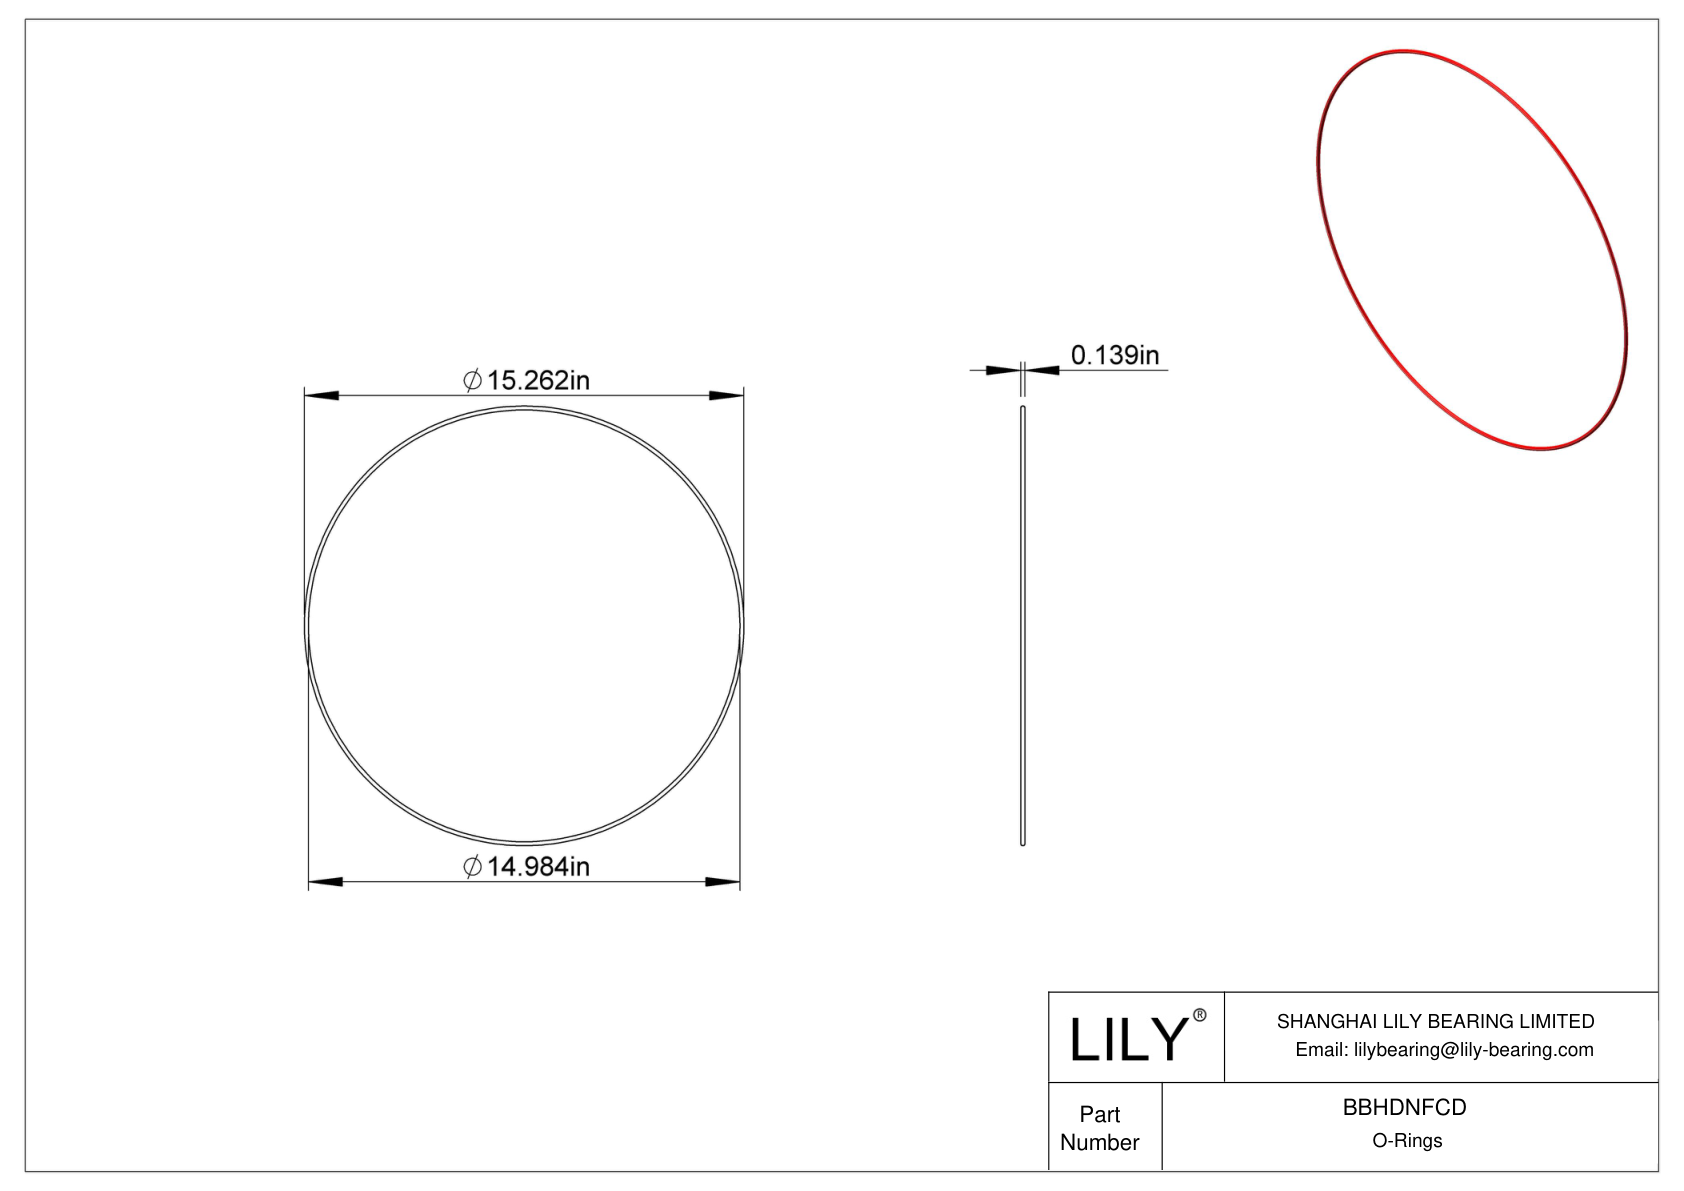 BBHDNFCD High Temperature O-Rings Round cad drawing